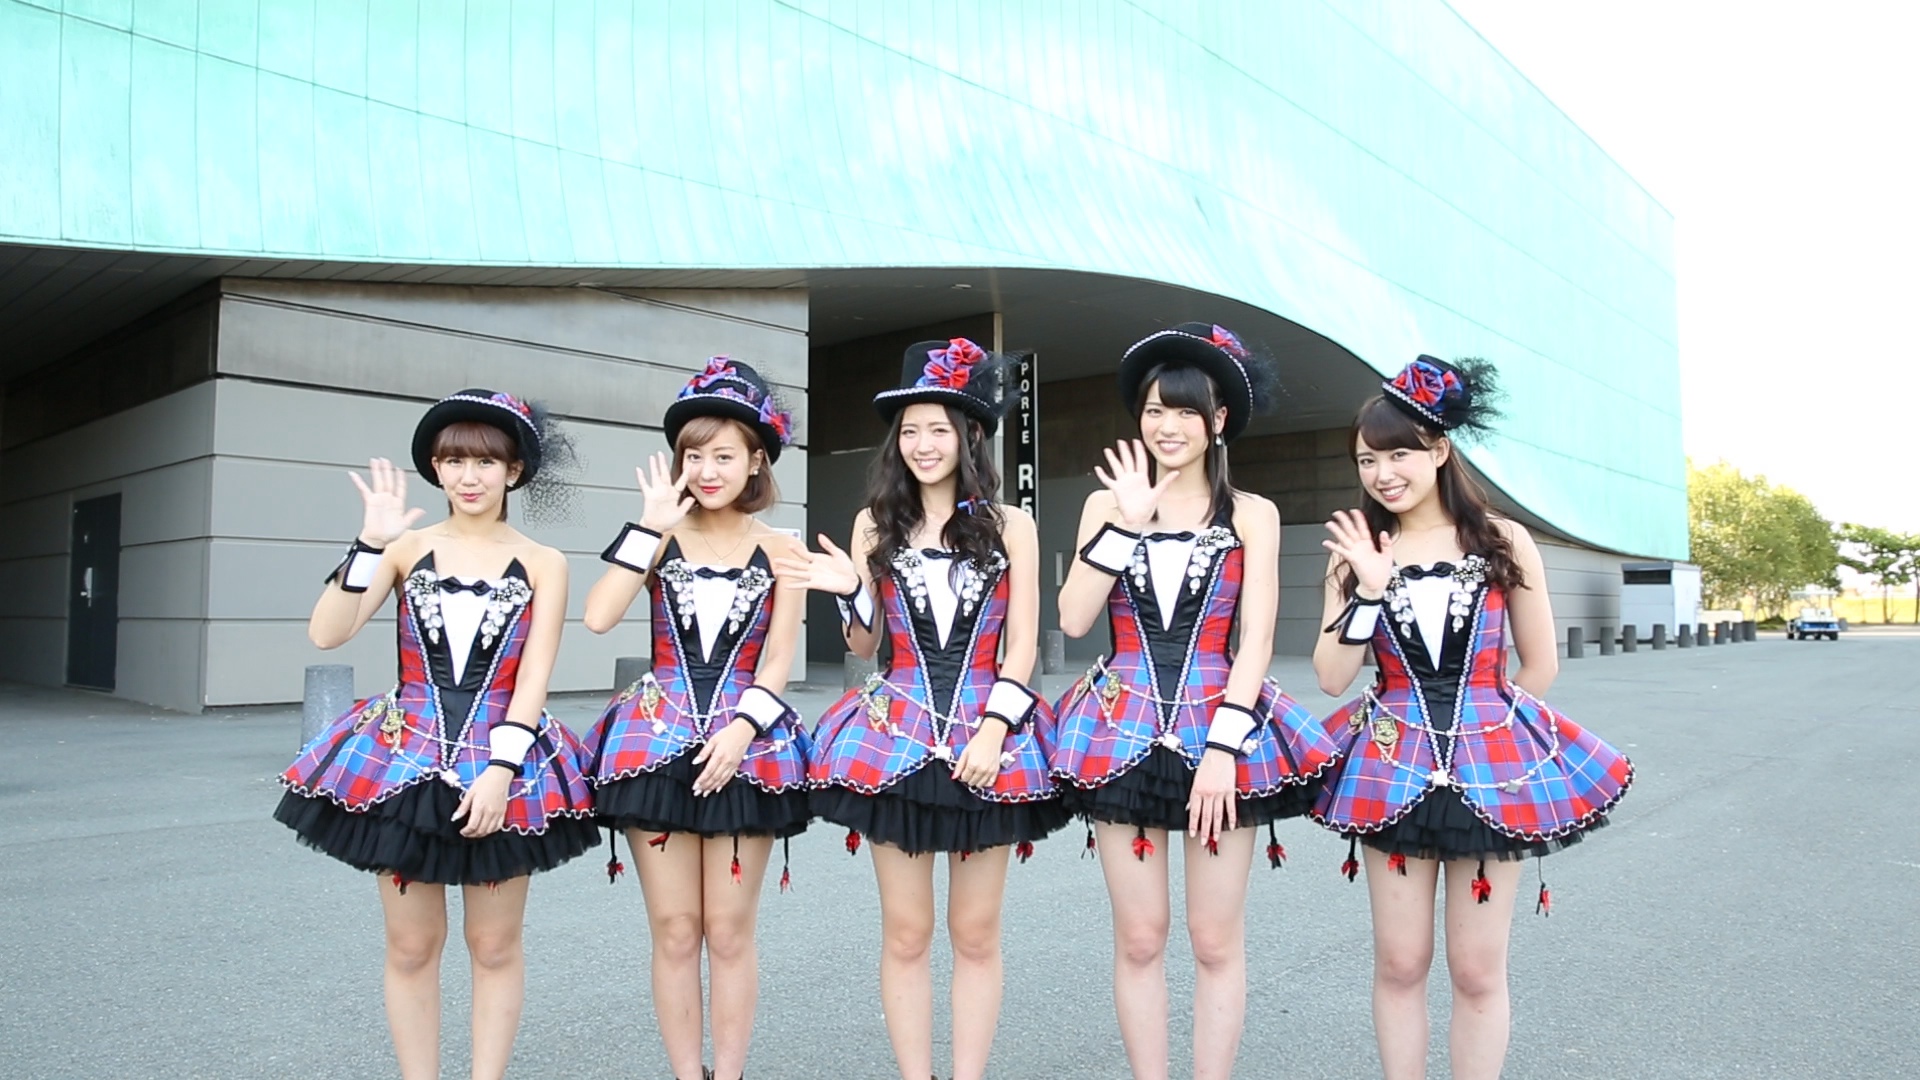 ℃-ute Backstage Interview at Japan Expo 15th